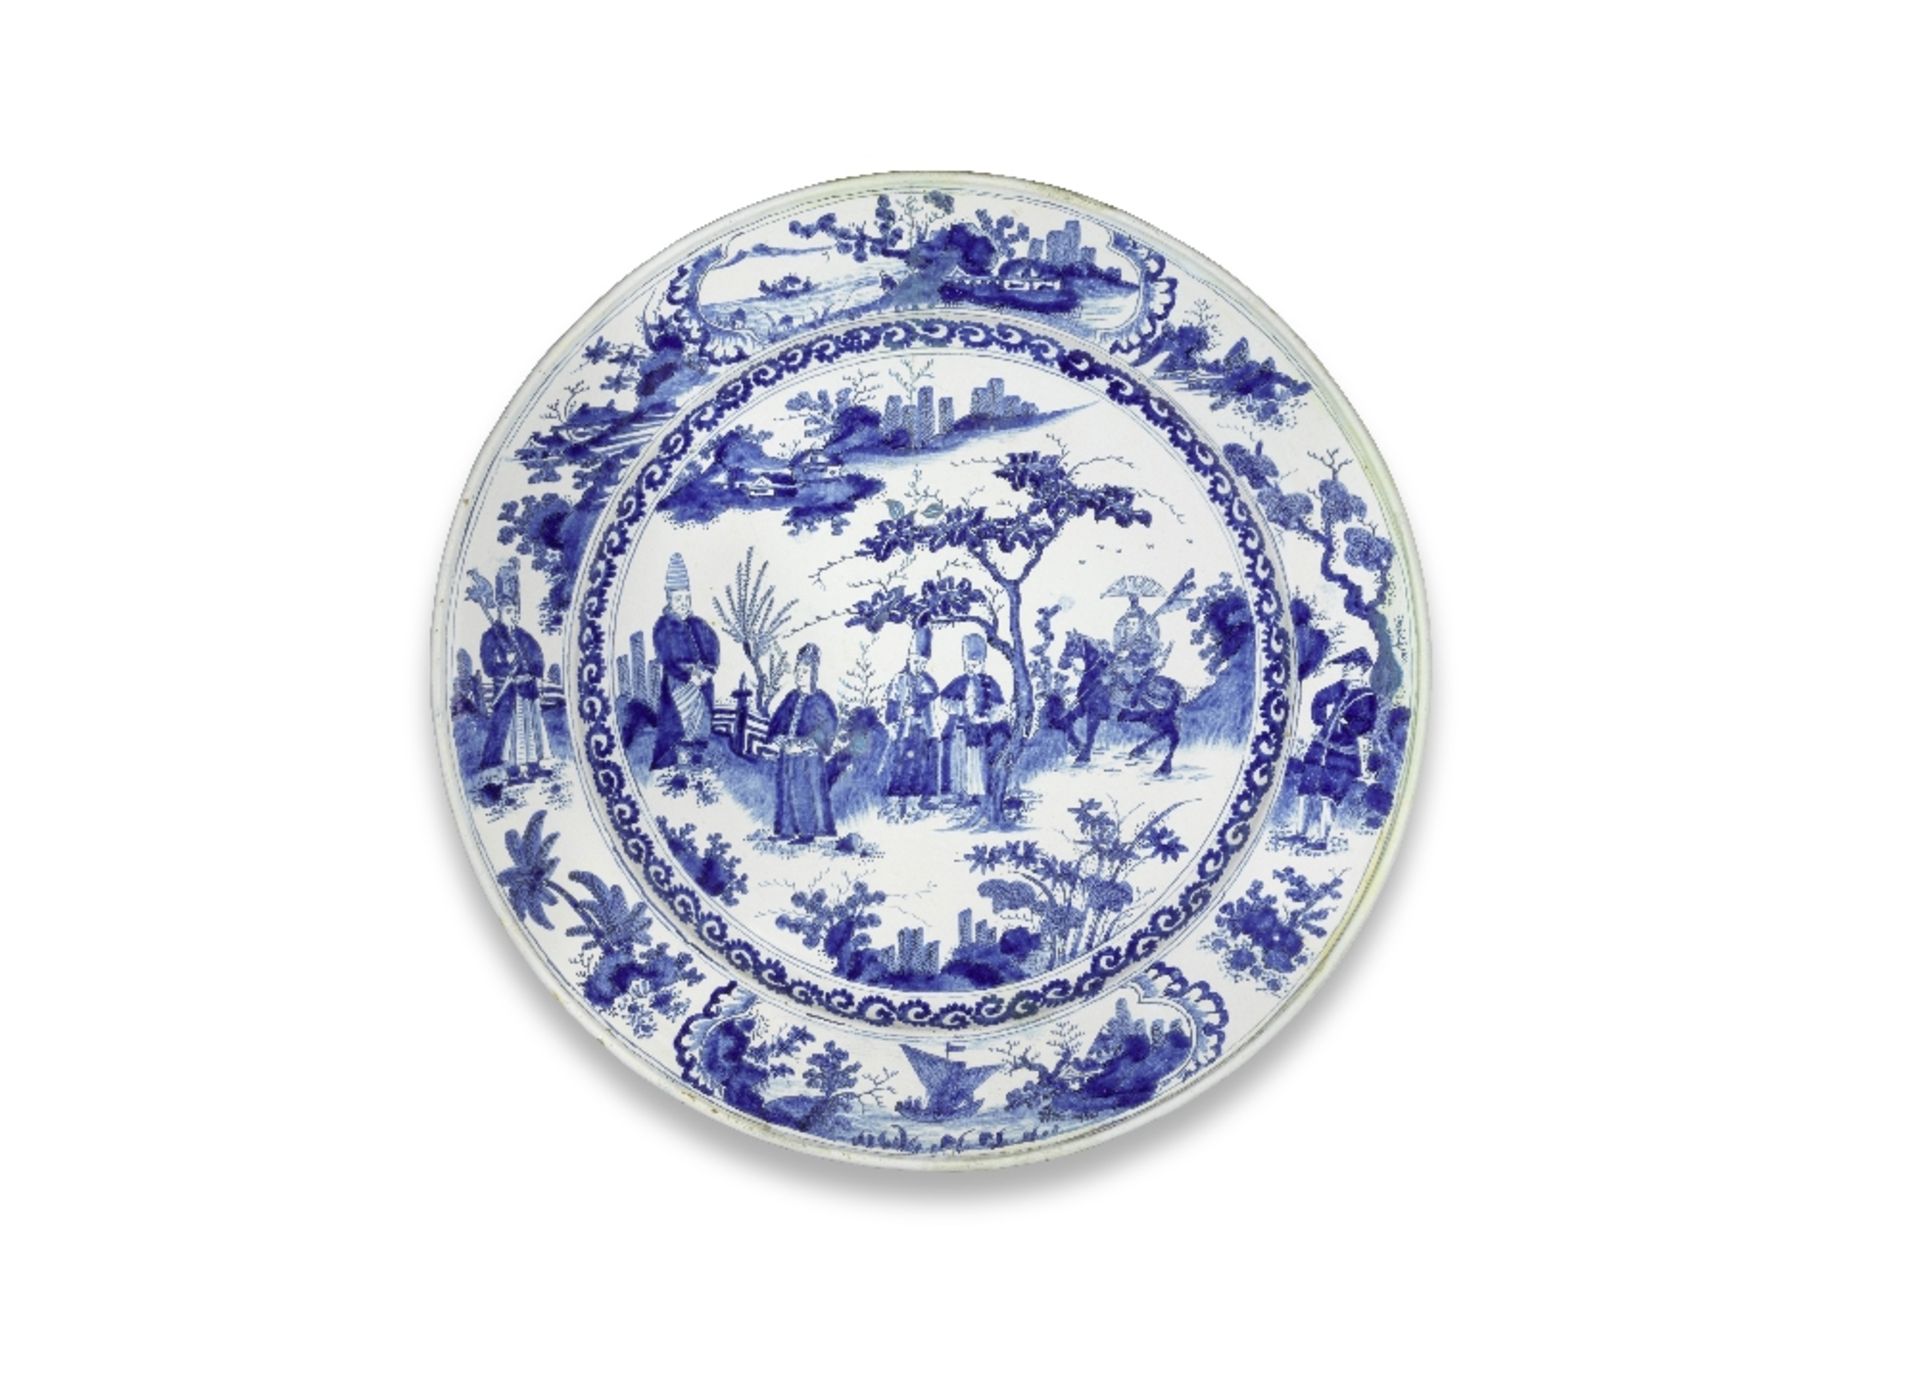 A very large and rare Nevers faience charger, circa 1680